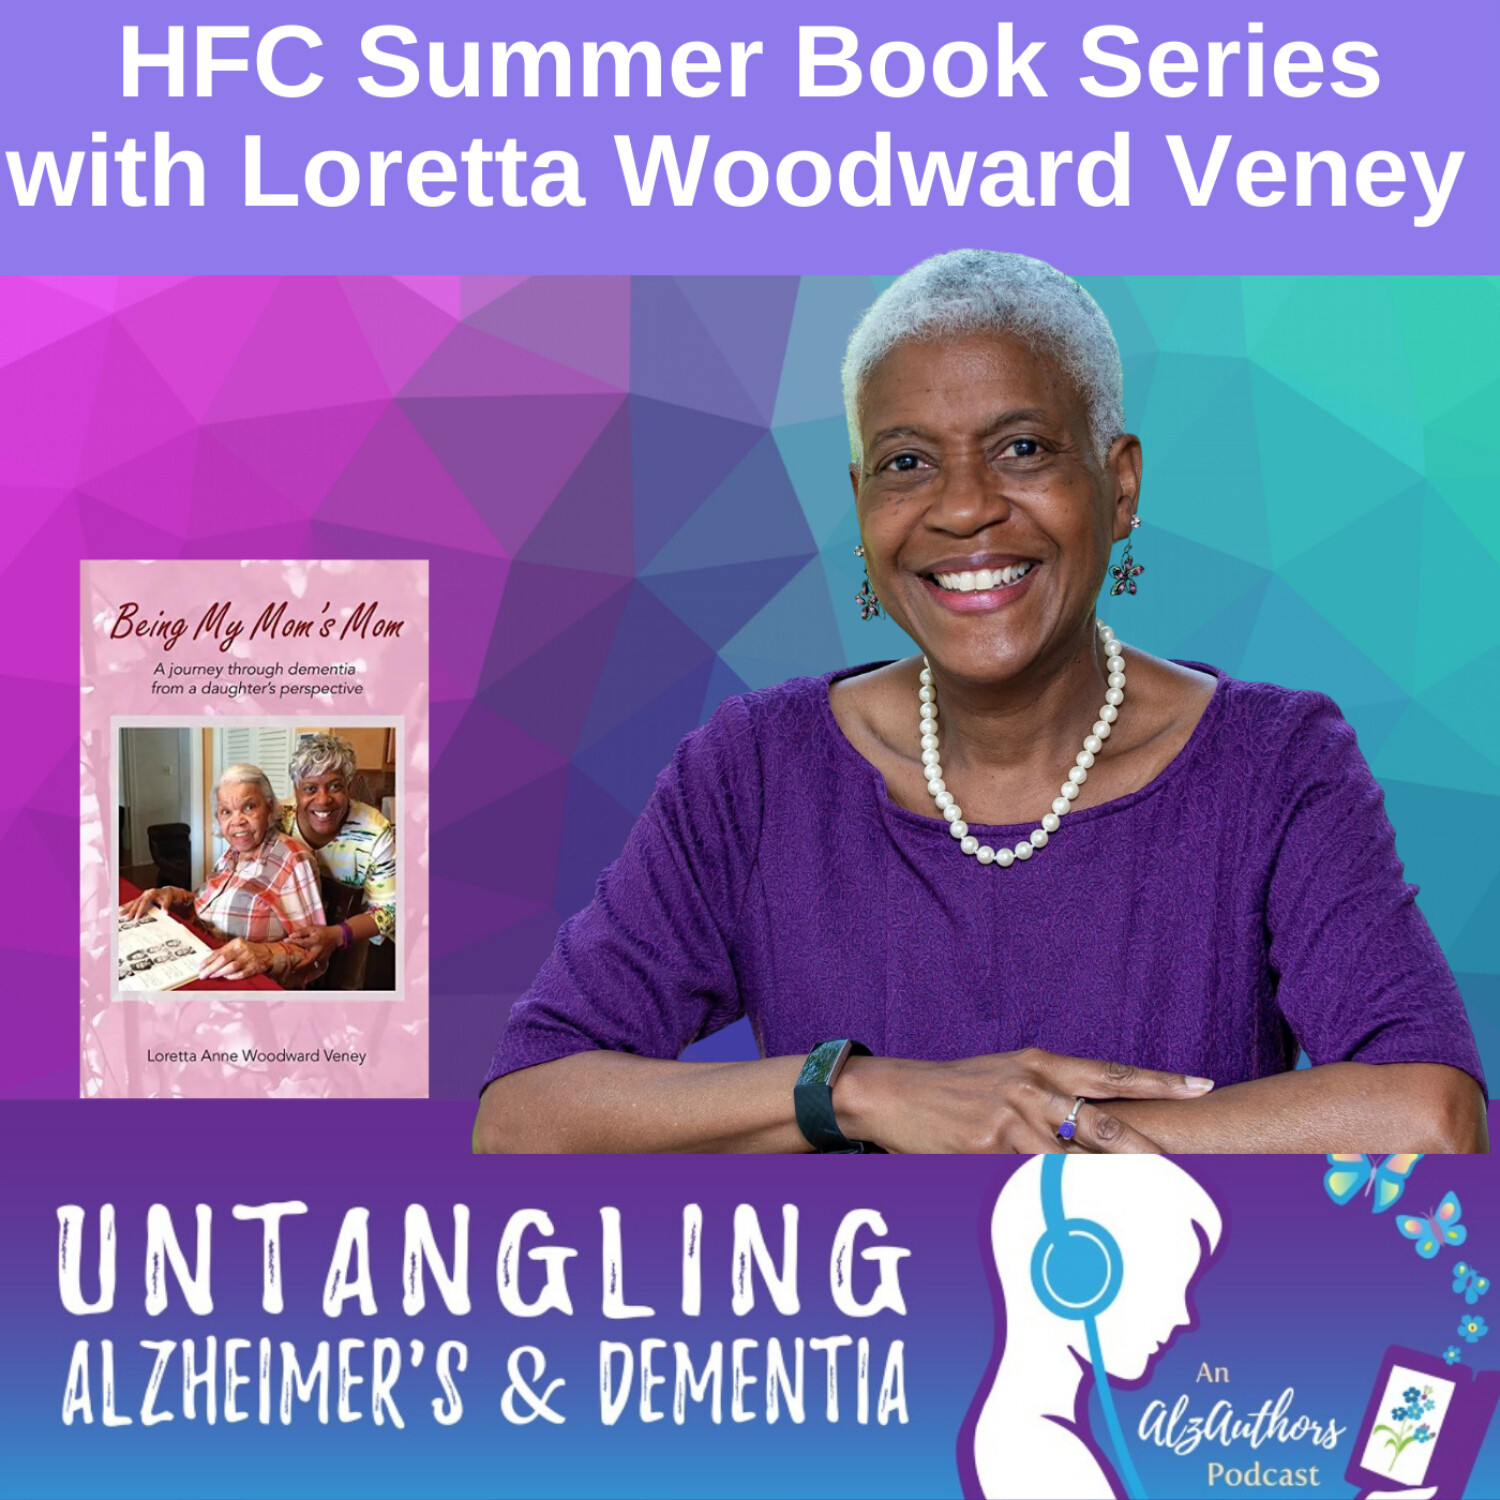 HFC and AlzAuthors Present Loretta Woodward Veney, author of Being My Mom's Mom